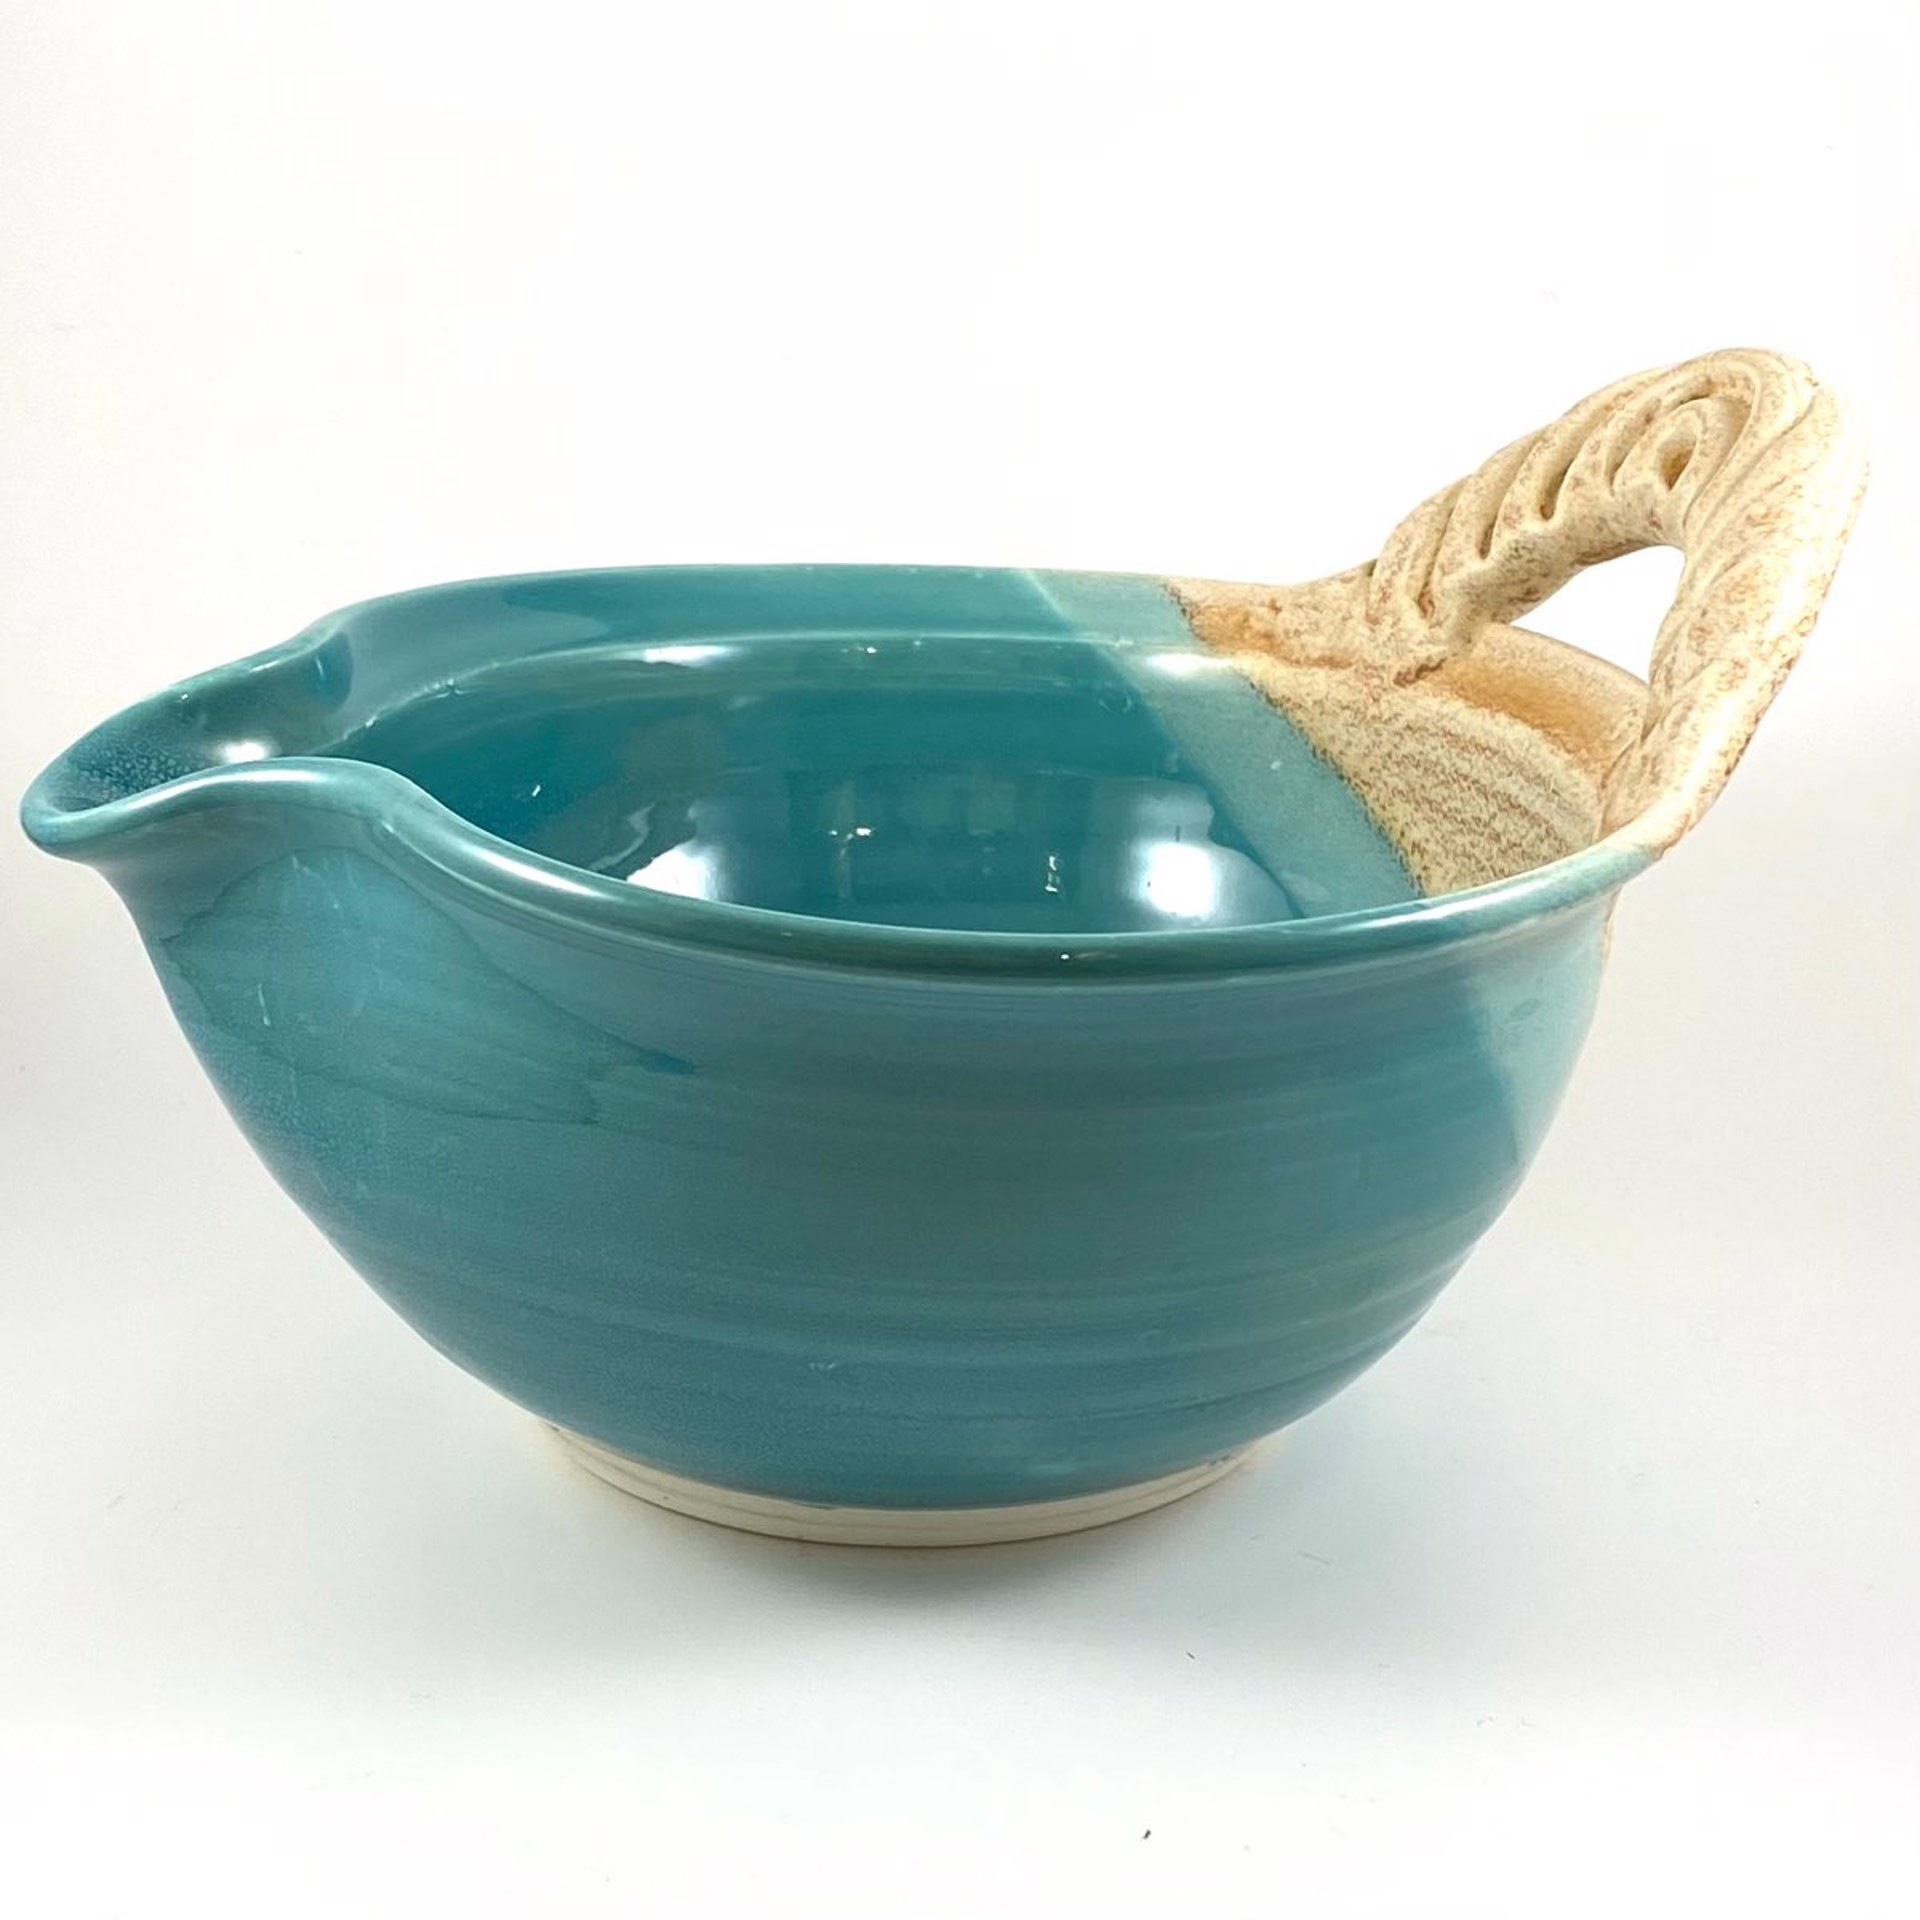 ILO22  Mixing Bowl with Spout Various by Ilene Olanoff